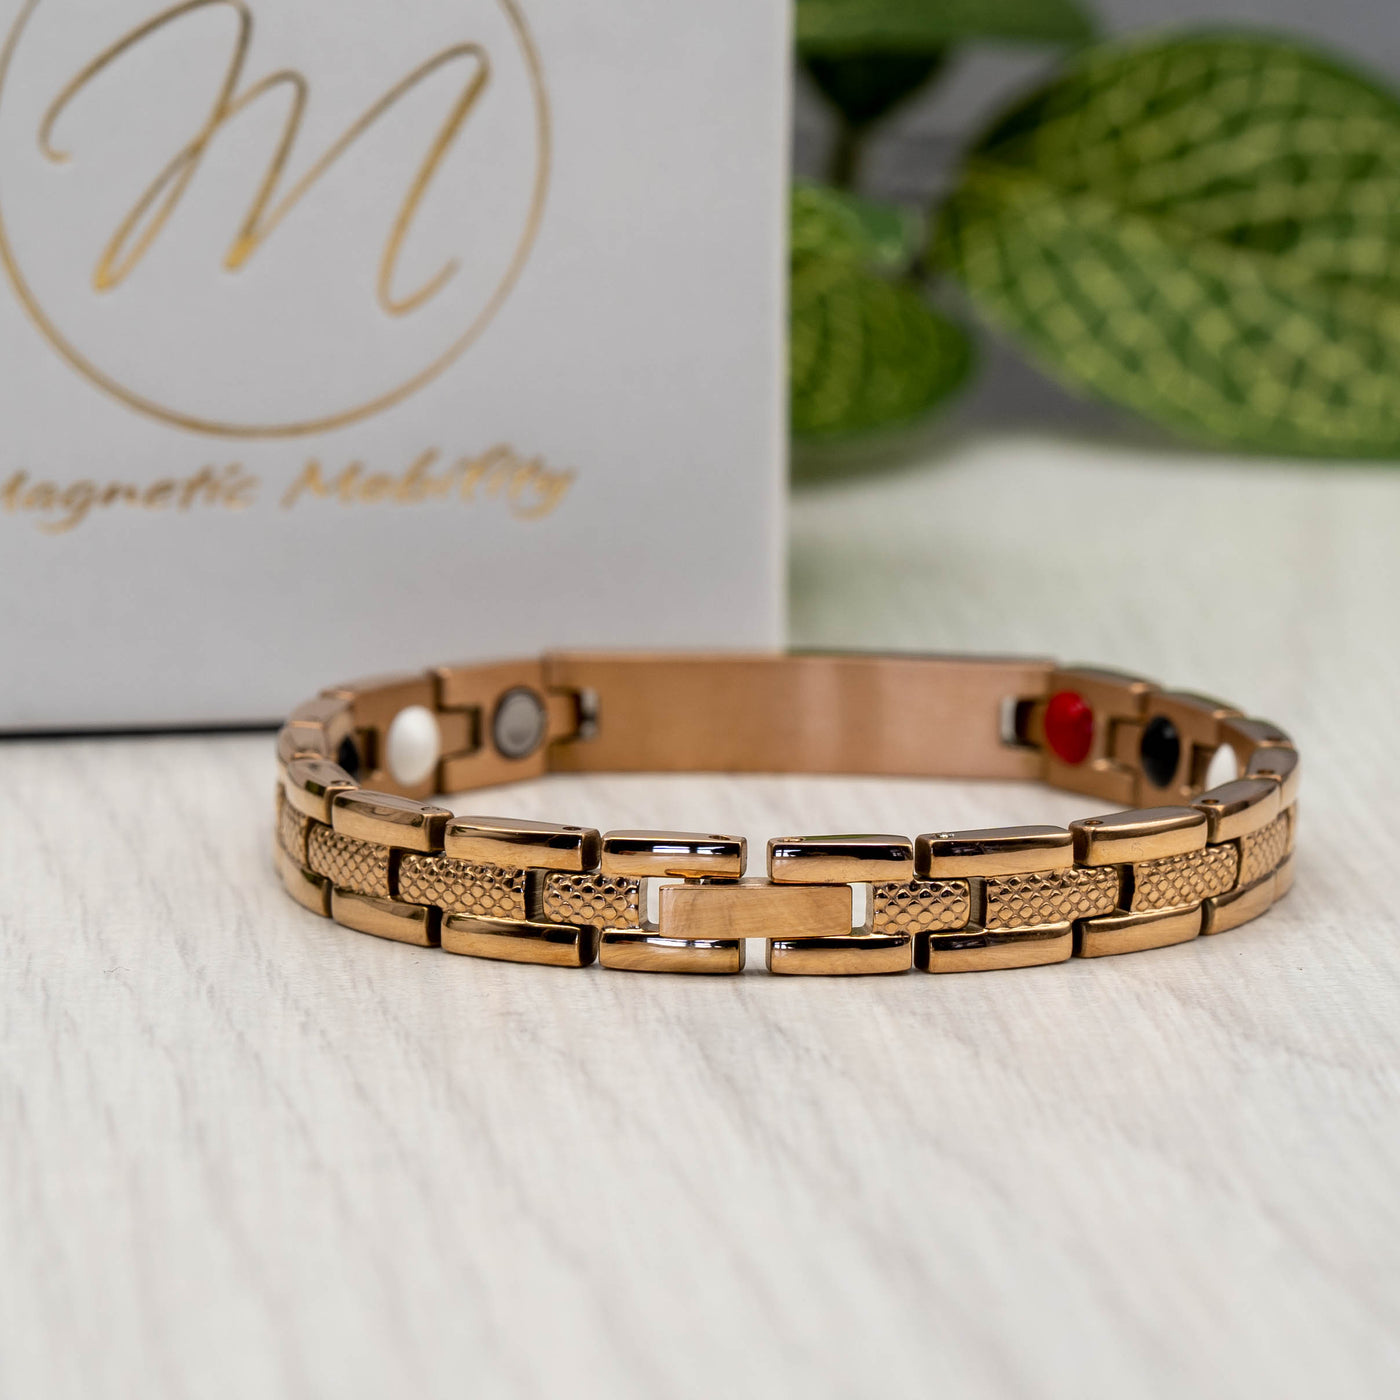 Honesty Dawn - Women's 4in1 Magnetic Bracelet, Rose gold plated stainless steel with swarovski crystals. Back view of bracelet showing clasp